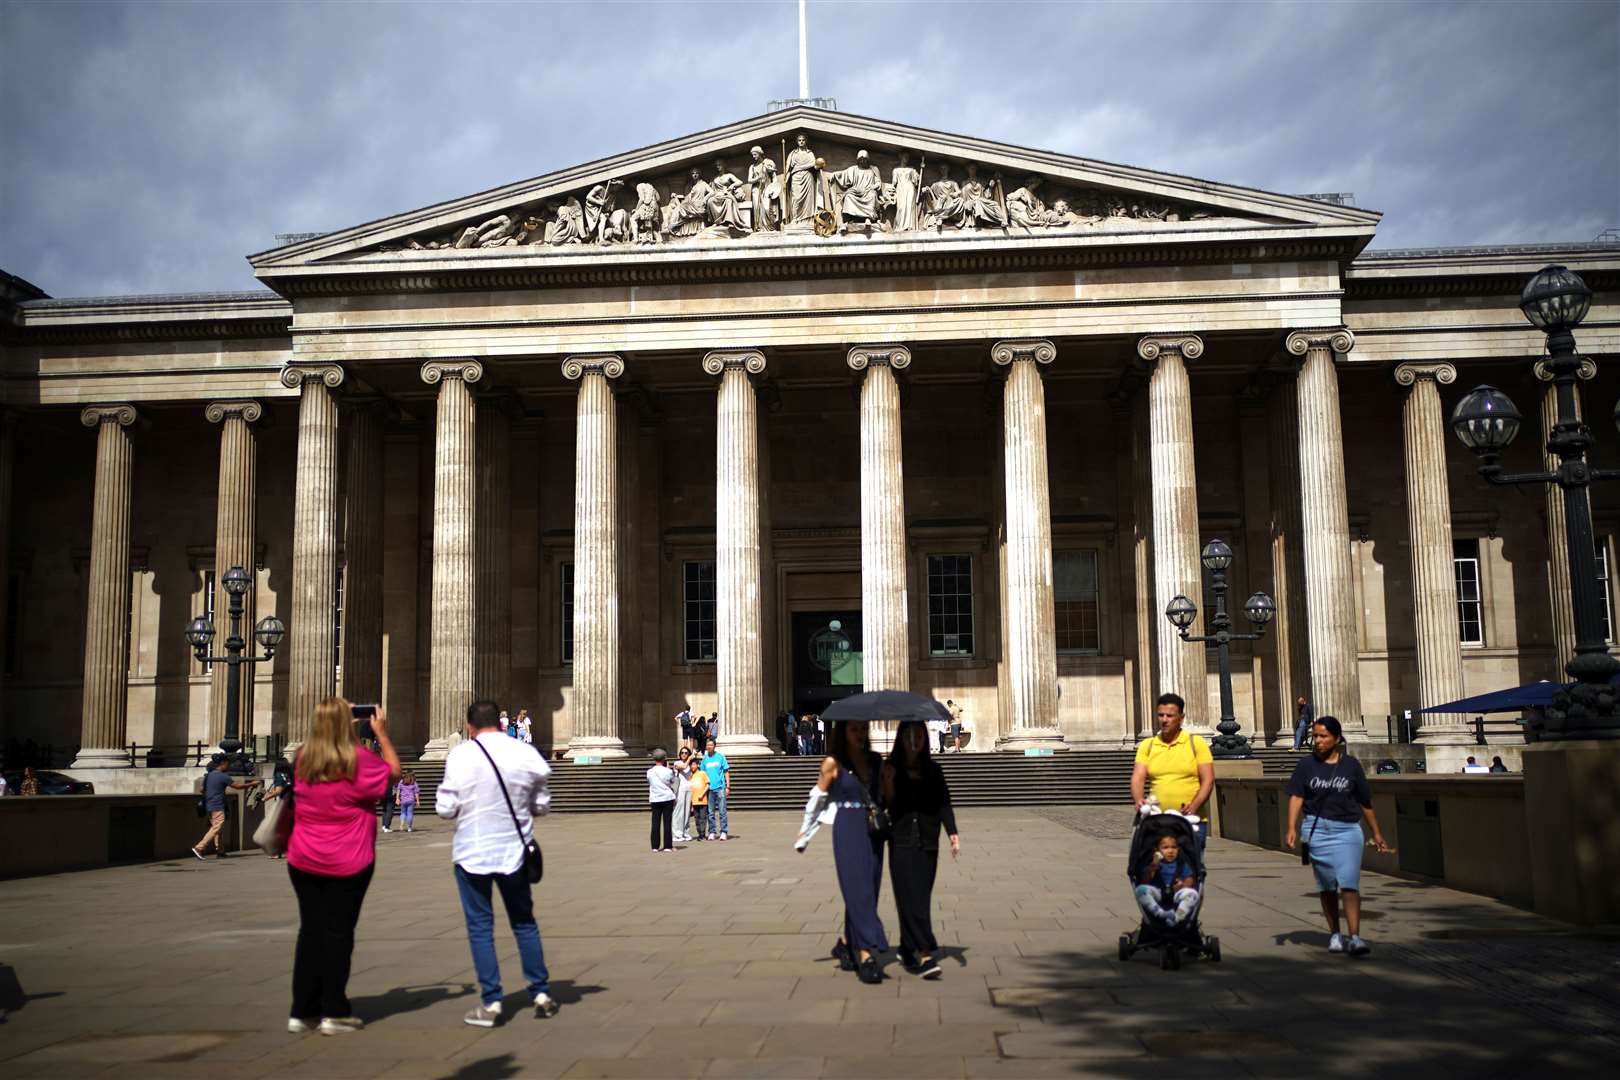 The British Museum museum revealed earlier this month that items from its collection were found to be ‘missing, stolen or damaged’ and police are investigating (Yui Mok/PA)